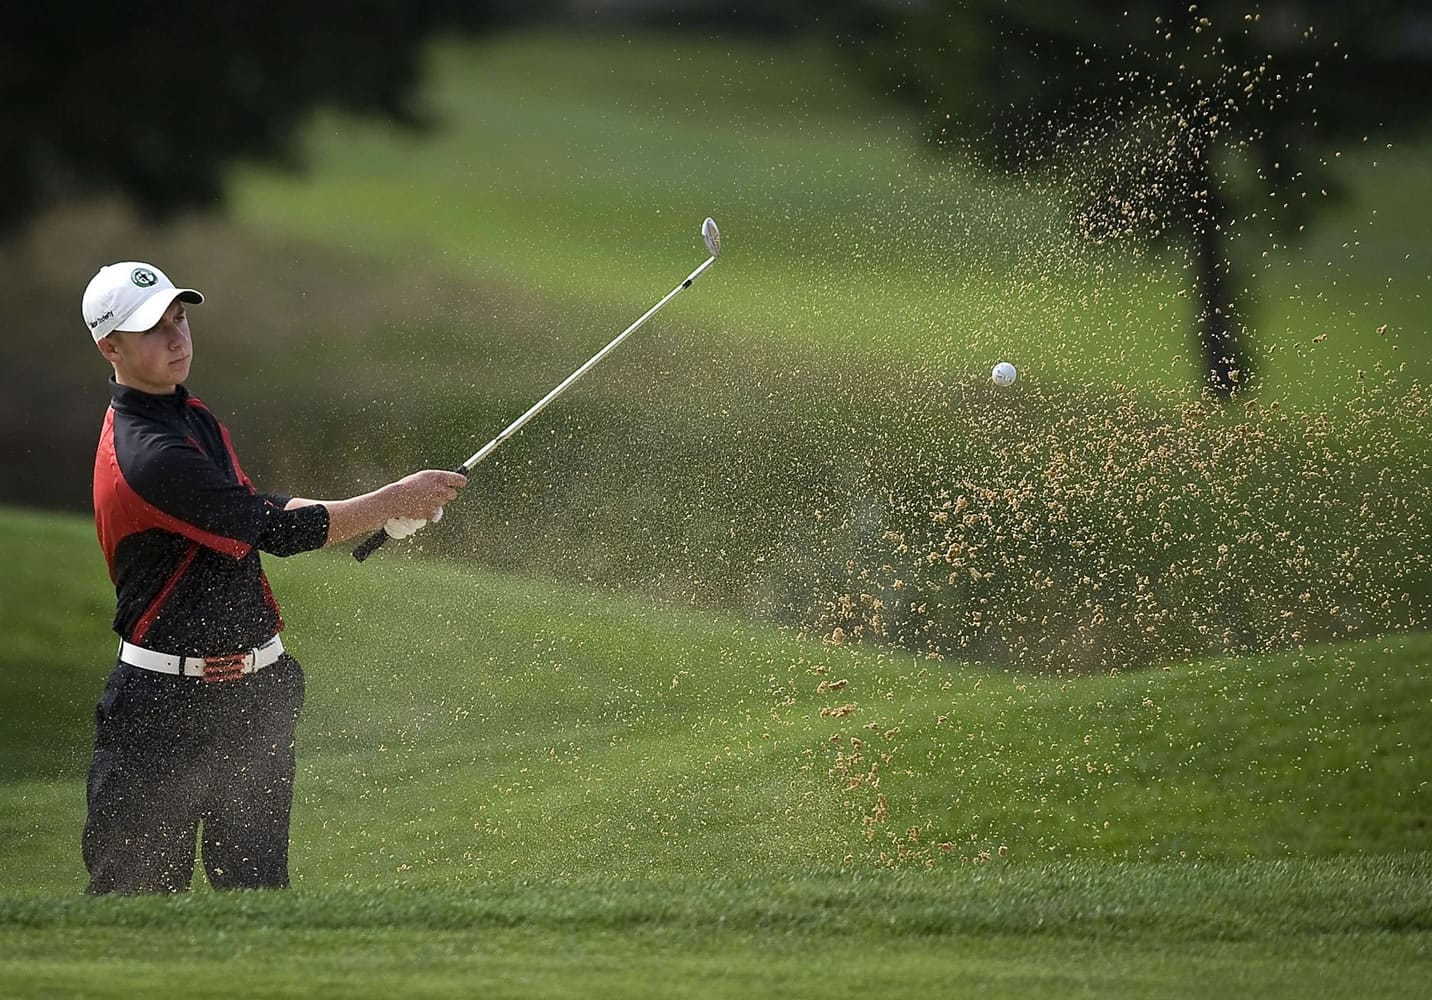 Union's Alistair Docherty hits out of the bunker on the 18th hole during the final round of the Class 4A district golf tournament Wednesday at Tri-Mountain Golf Course in Ridgefield.